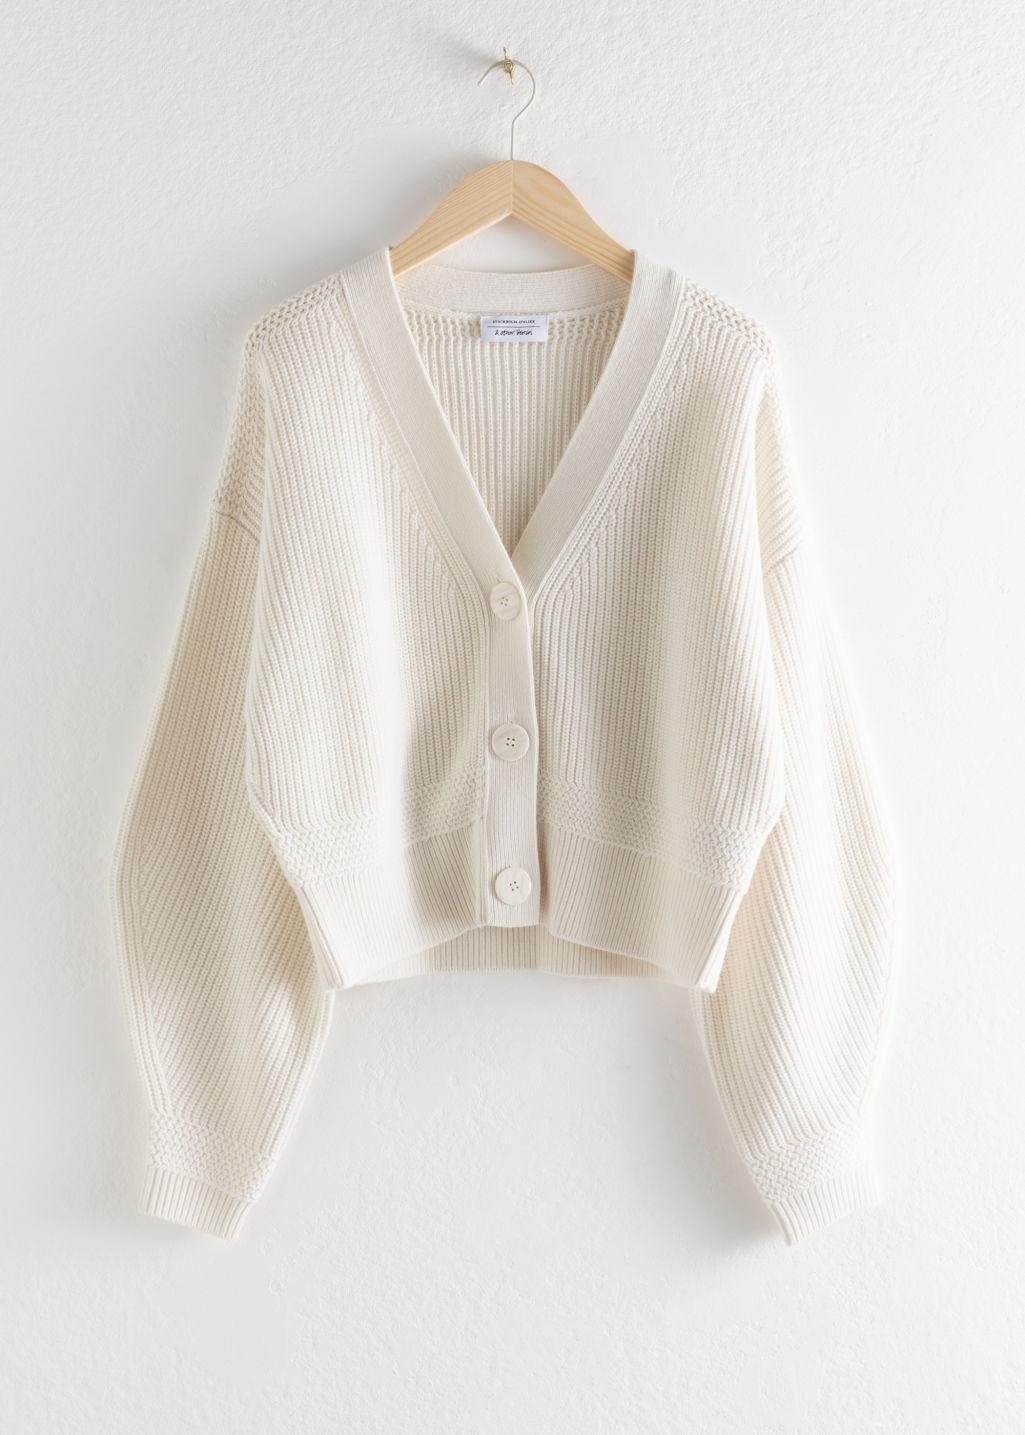 ☀ Other Stories Cropped Cardigan in ...